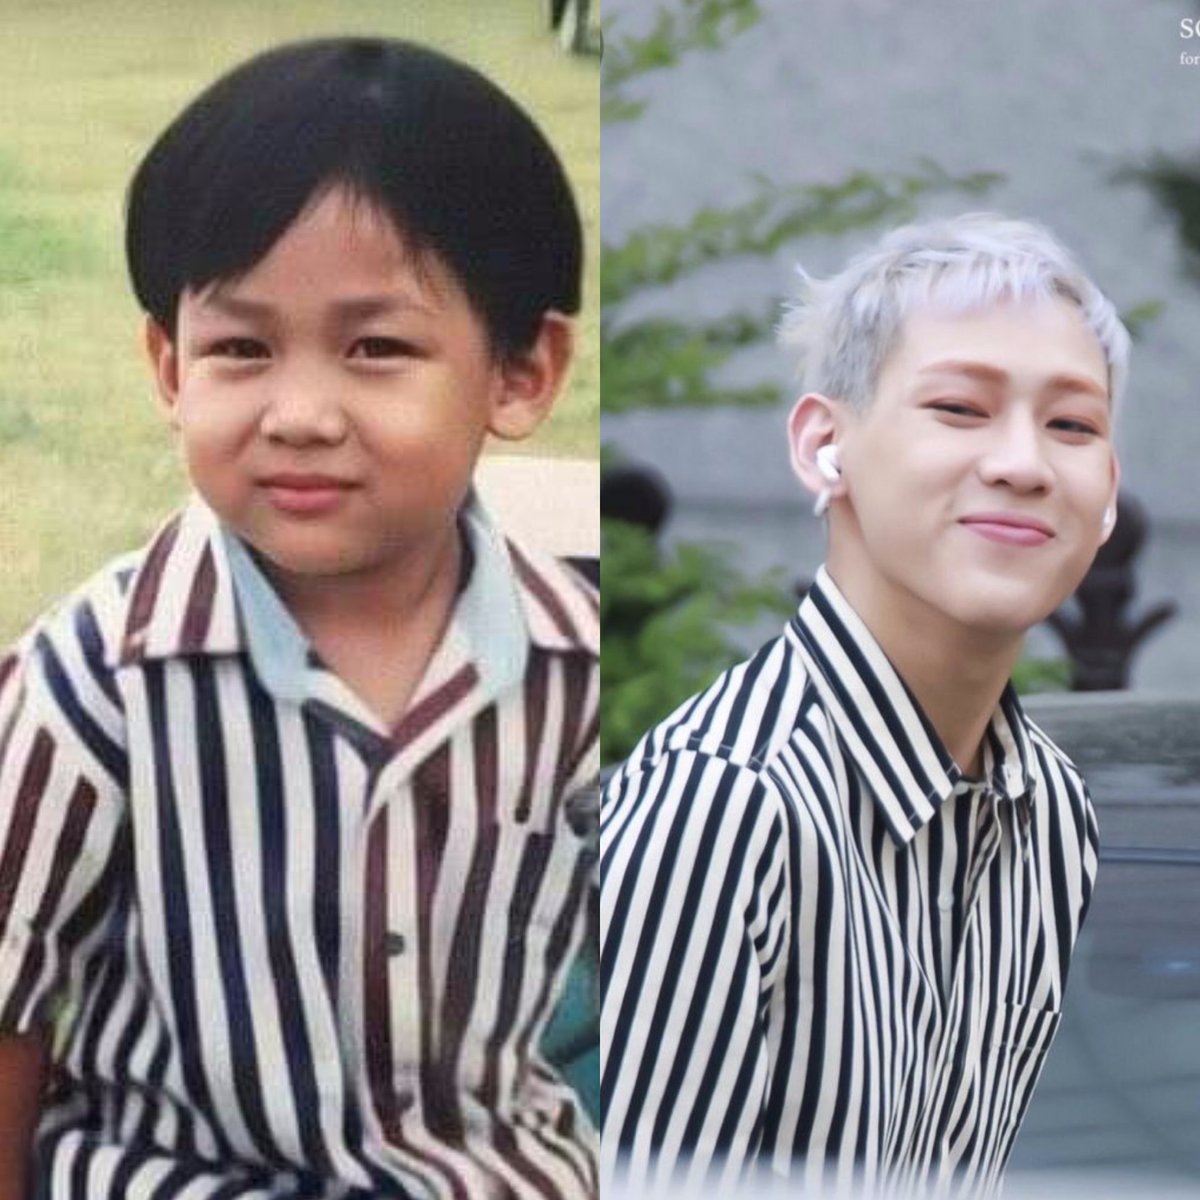  #GOT7  #갓세븐  @GOT7Official  @BamBam1A the clothes look the same, its so cuteeee